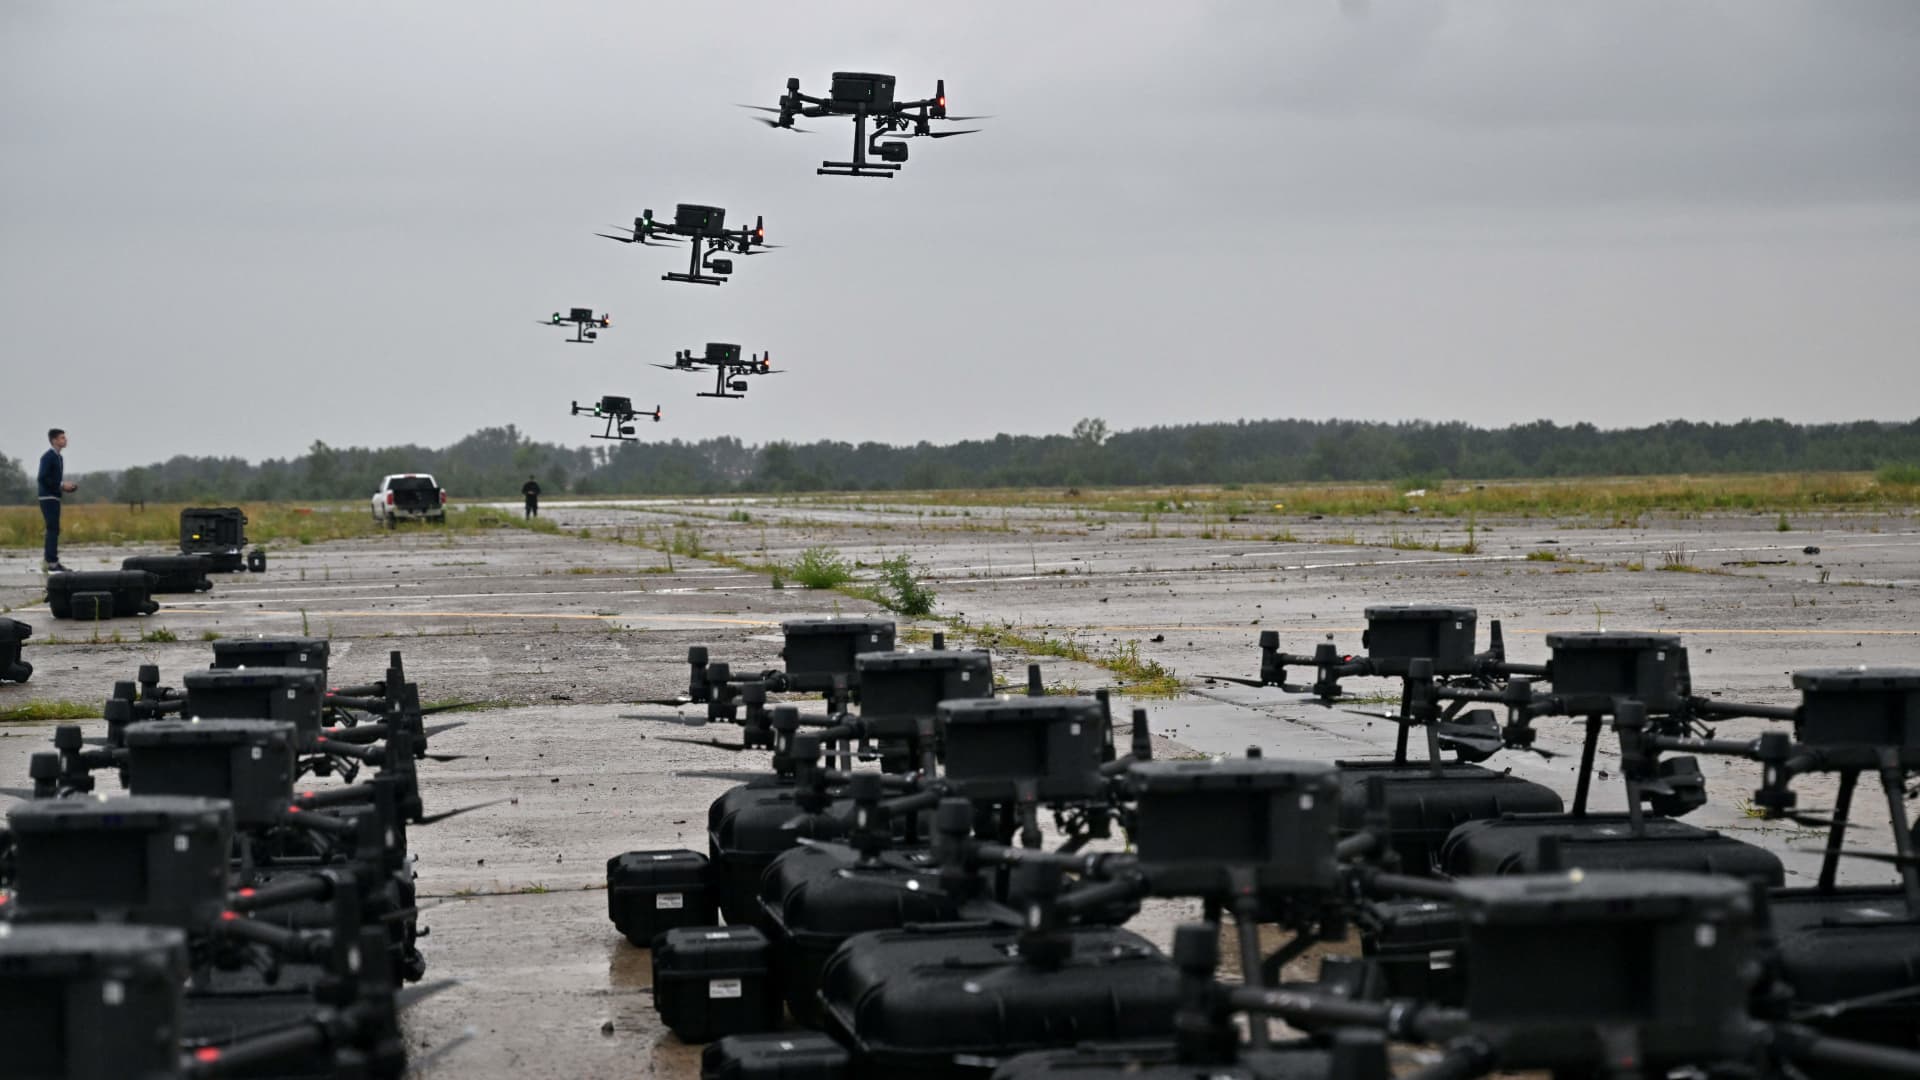 Chinese drone maker DJI is dominating the market – despite being blacklisted by the U.S.